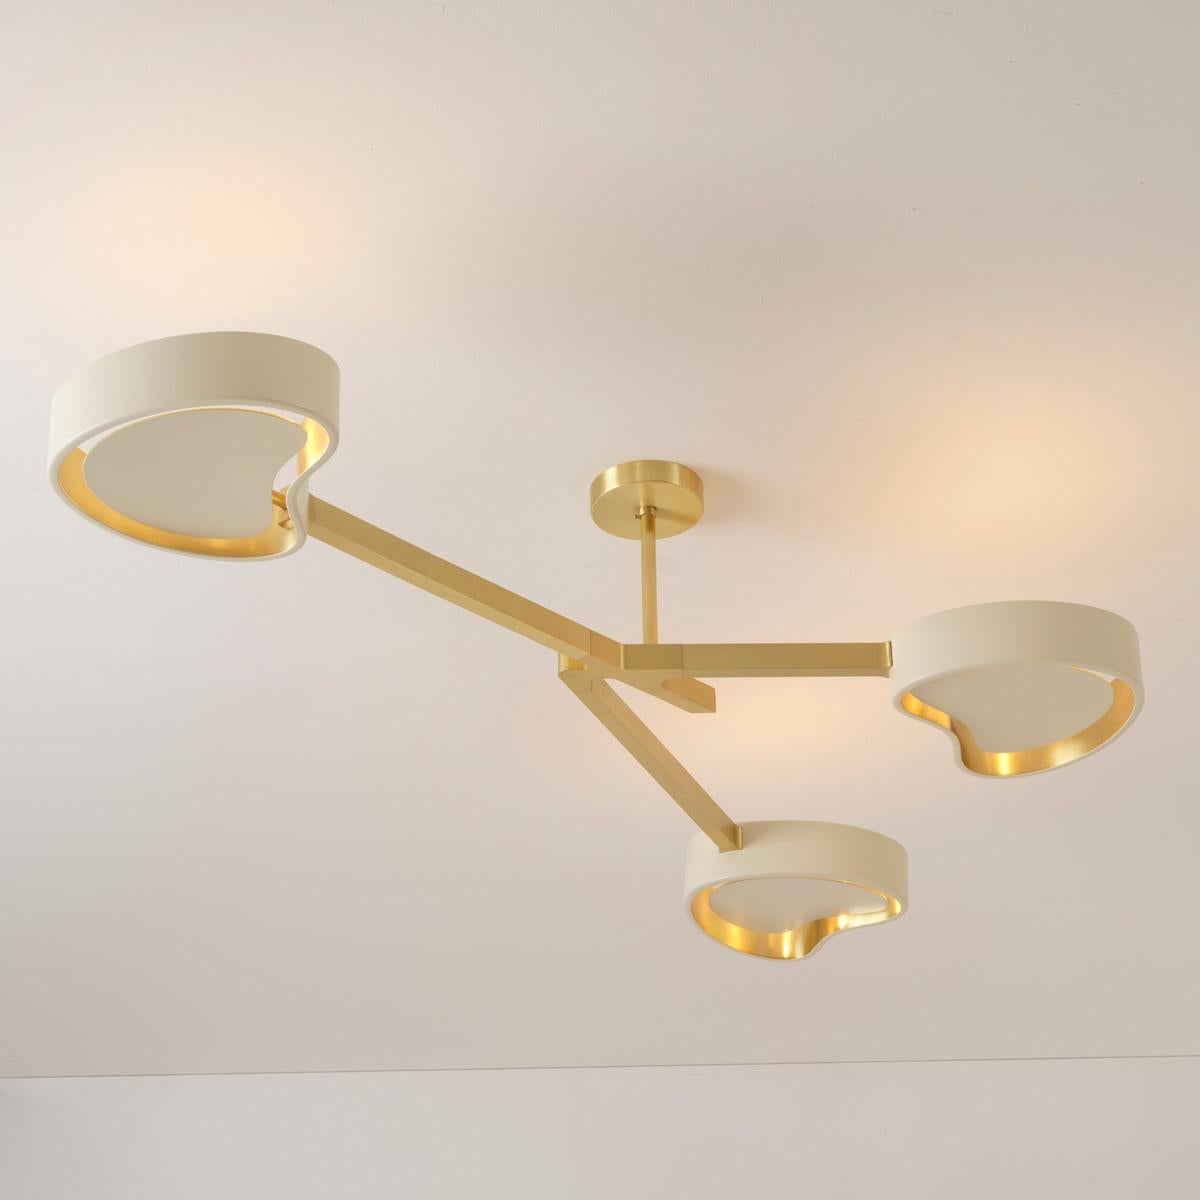 Italian Cuore N.3 Ceiling Light by Gaspare Asaro. Bronze Finish For Sale